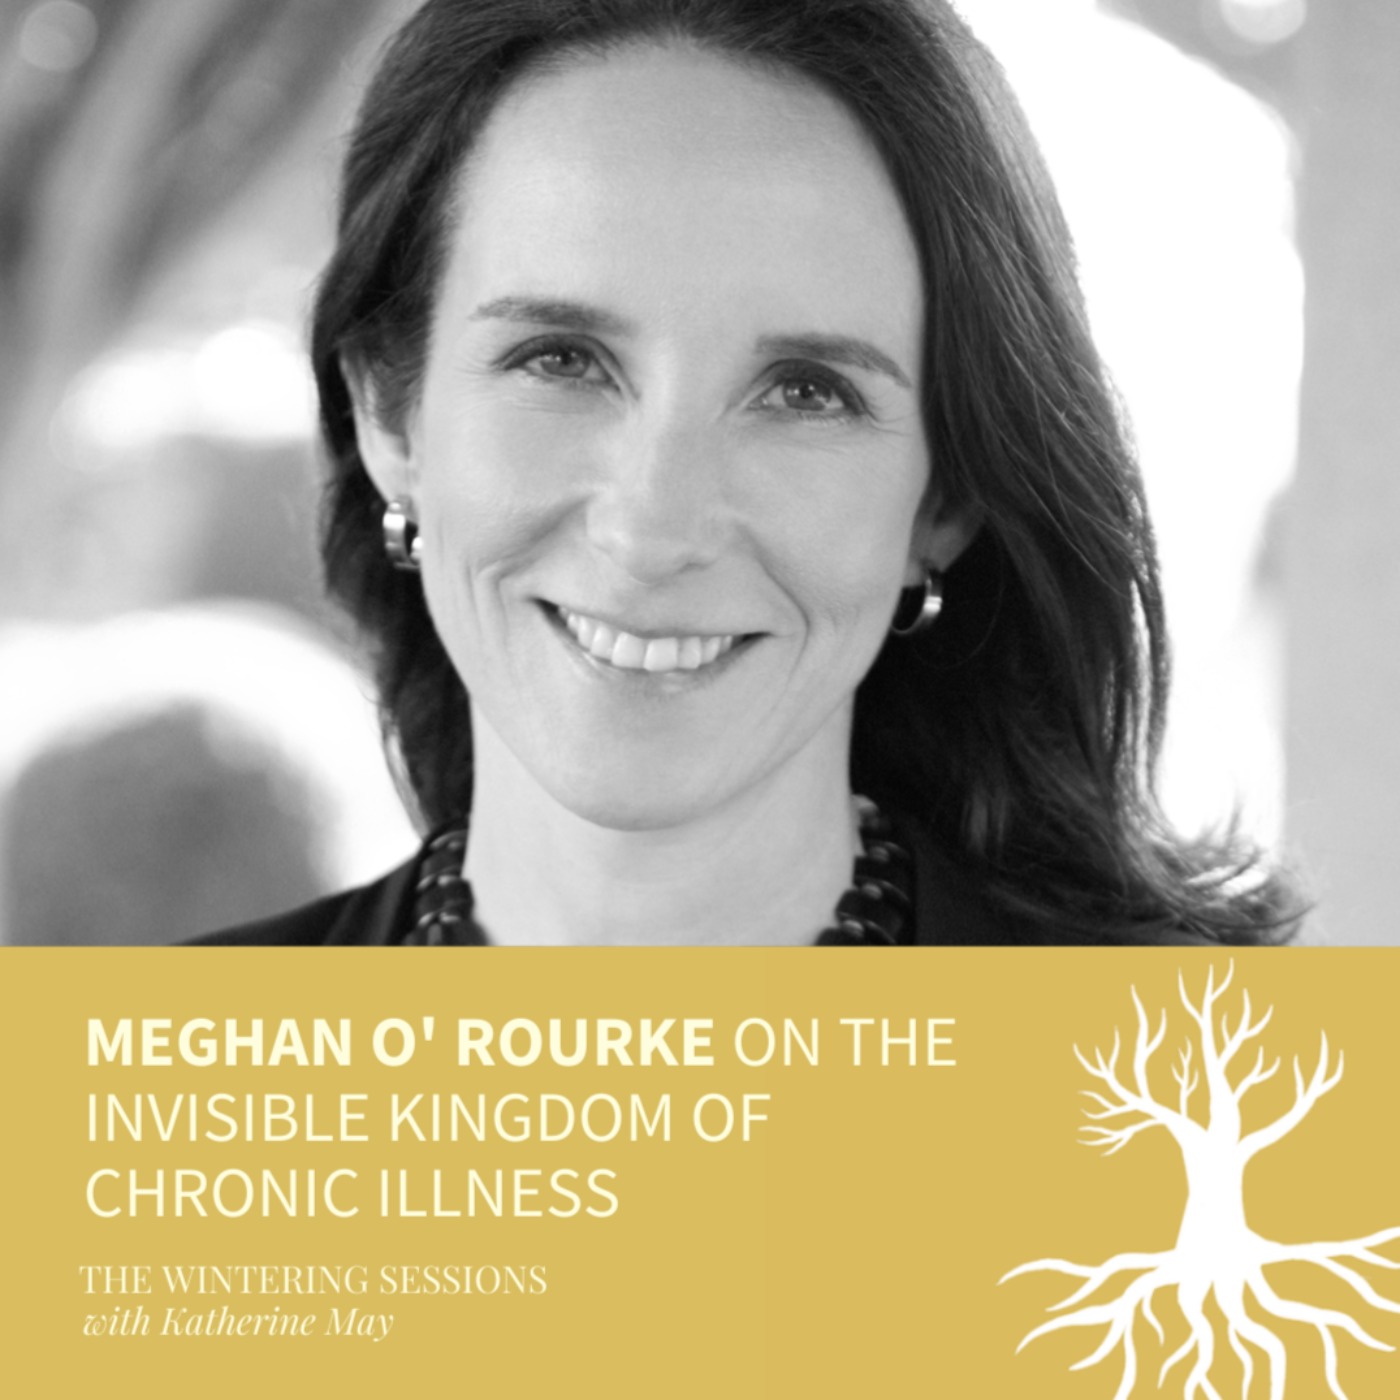 Meghan O' Rourke on the invisible kingdom of chronic illness